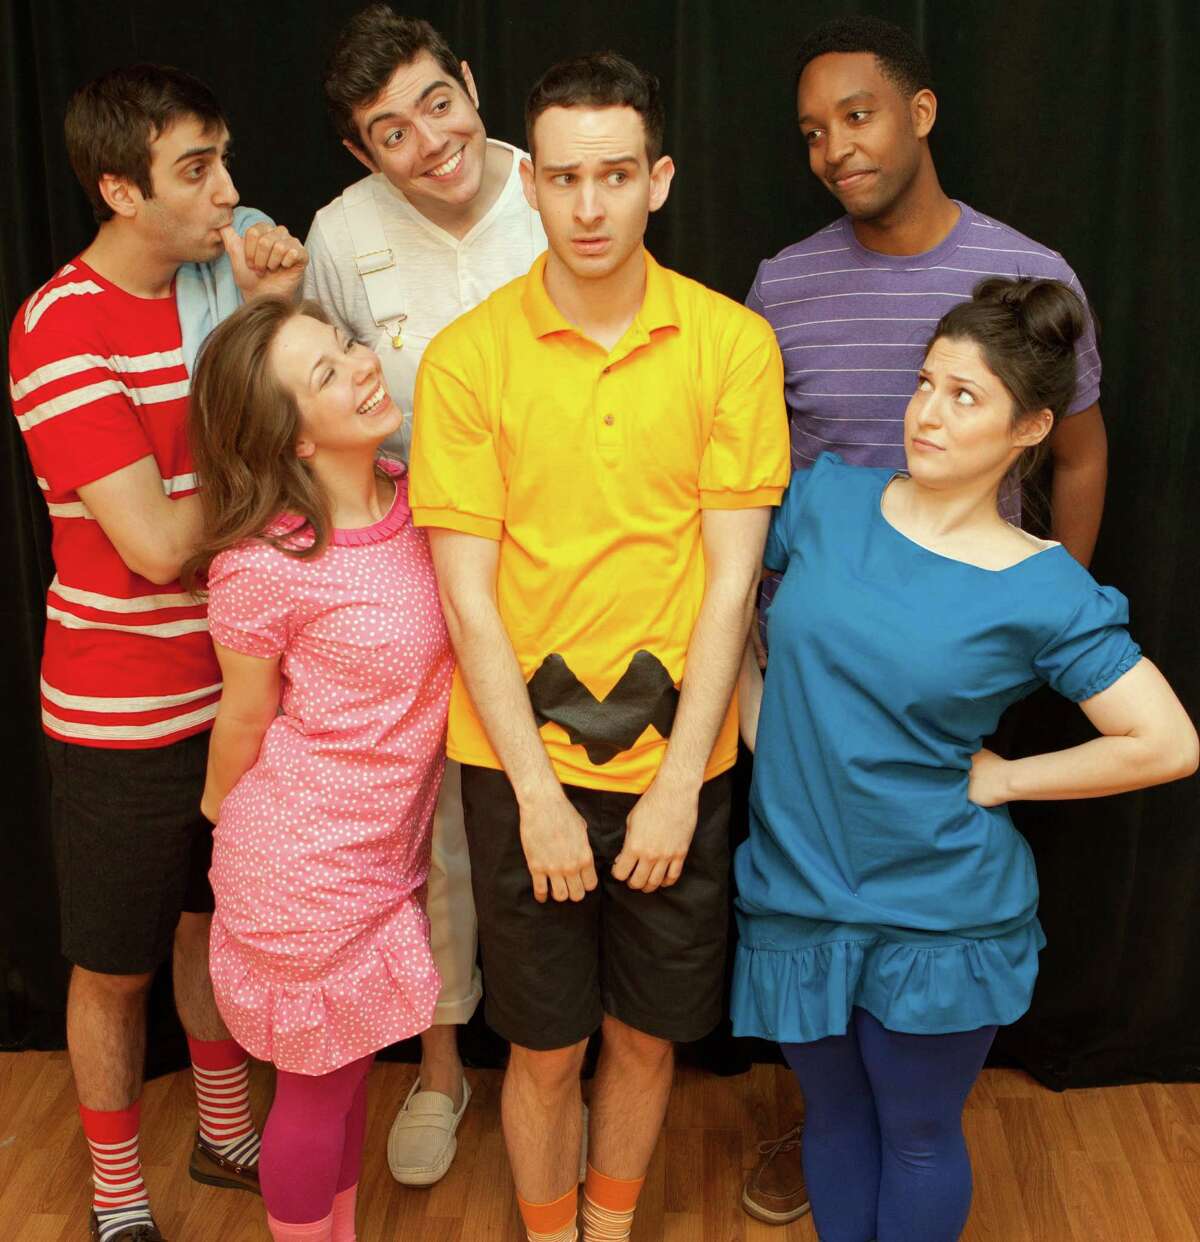 Northeast Children's Theatre Company presents "You're A Good Man, Charlie Brown" at Fairfield Theatre Company at StageOne Saturday, May 4 through Sunday, May 12.